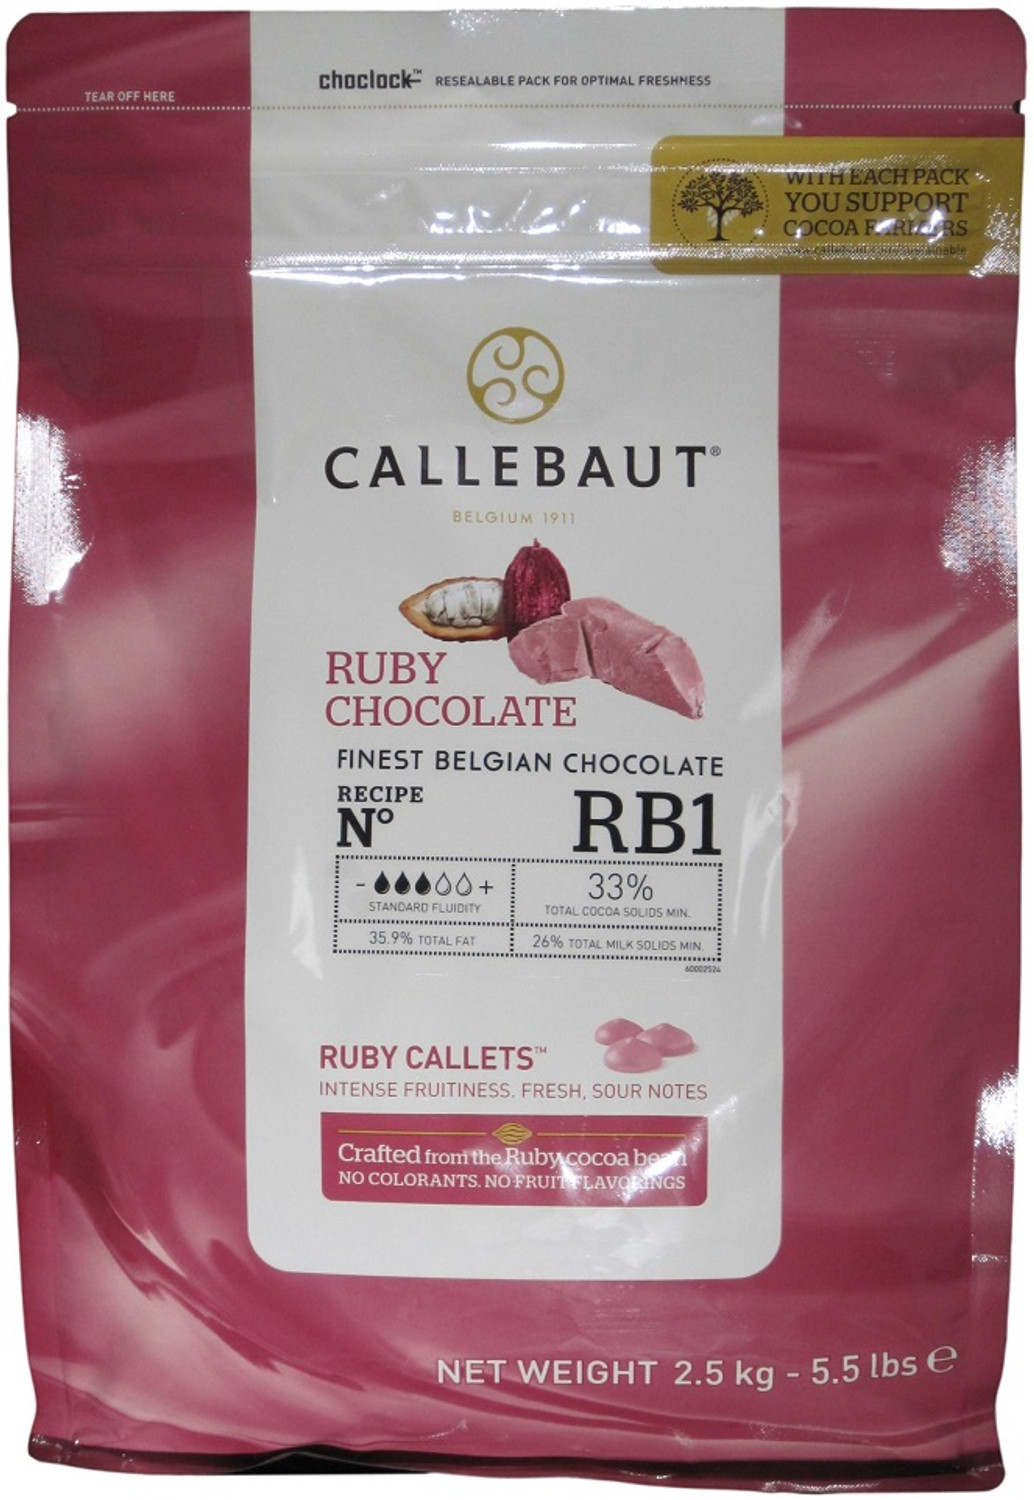 Callebaut Ruby Chocolate RB1 33% 1 lb - Pastry Depot